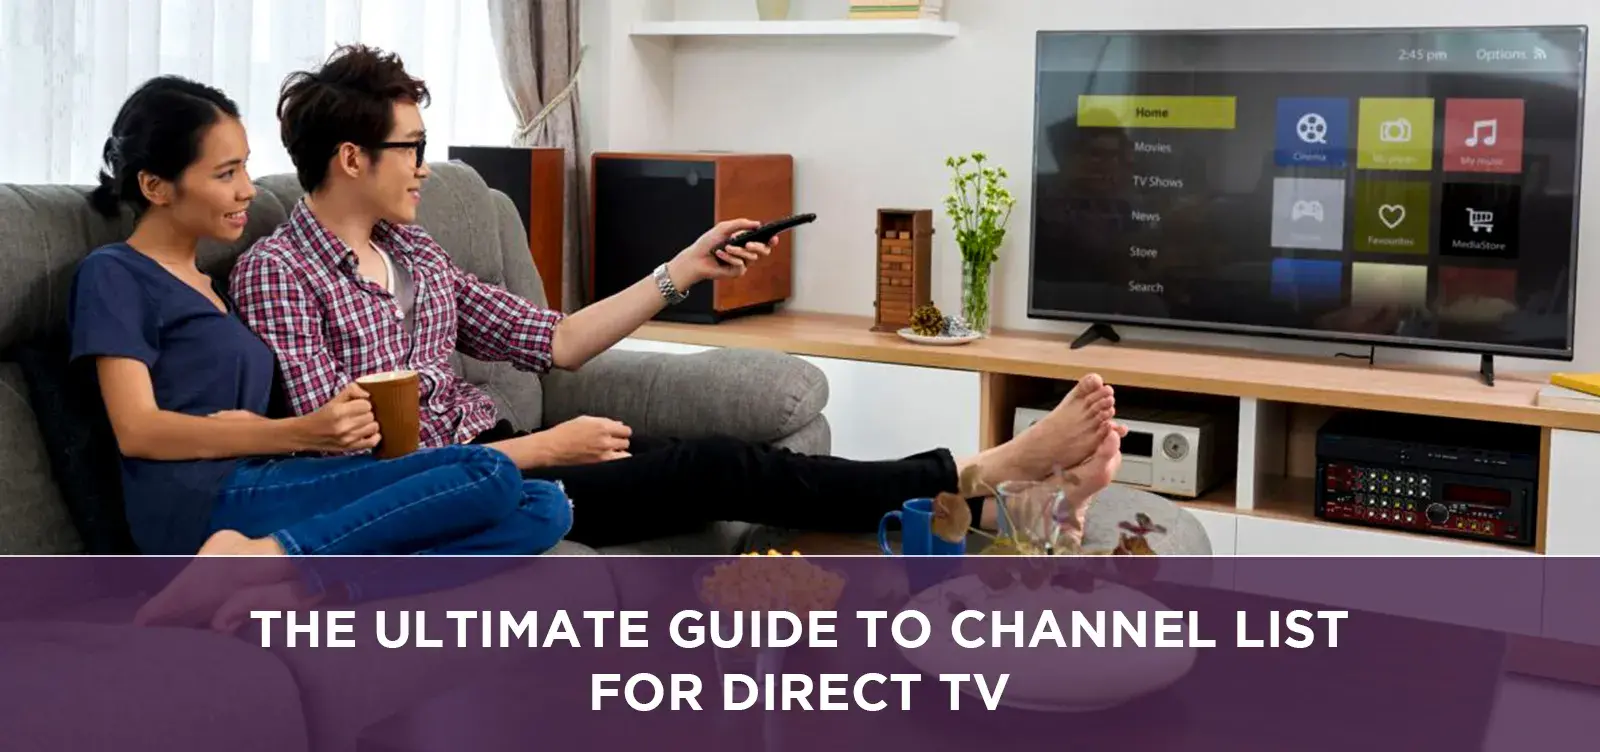 The Ultimate Guide to channel list for direct tv